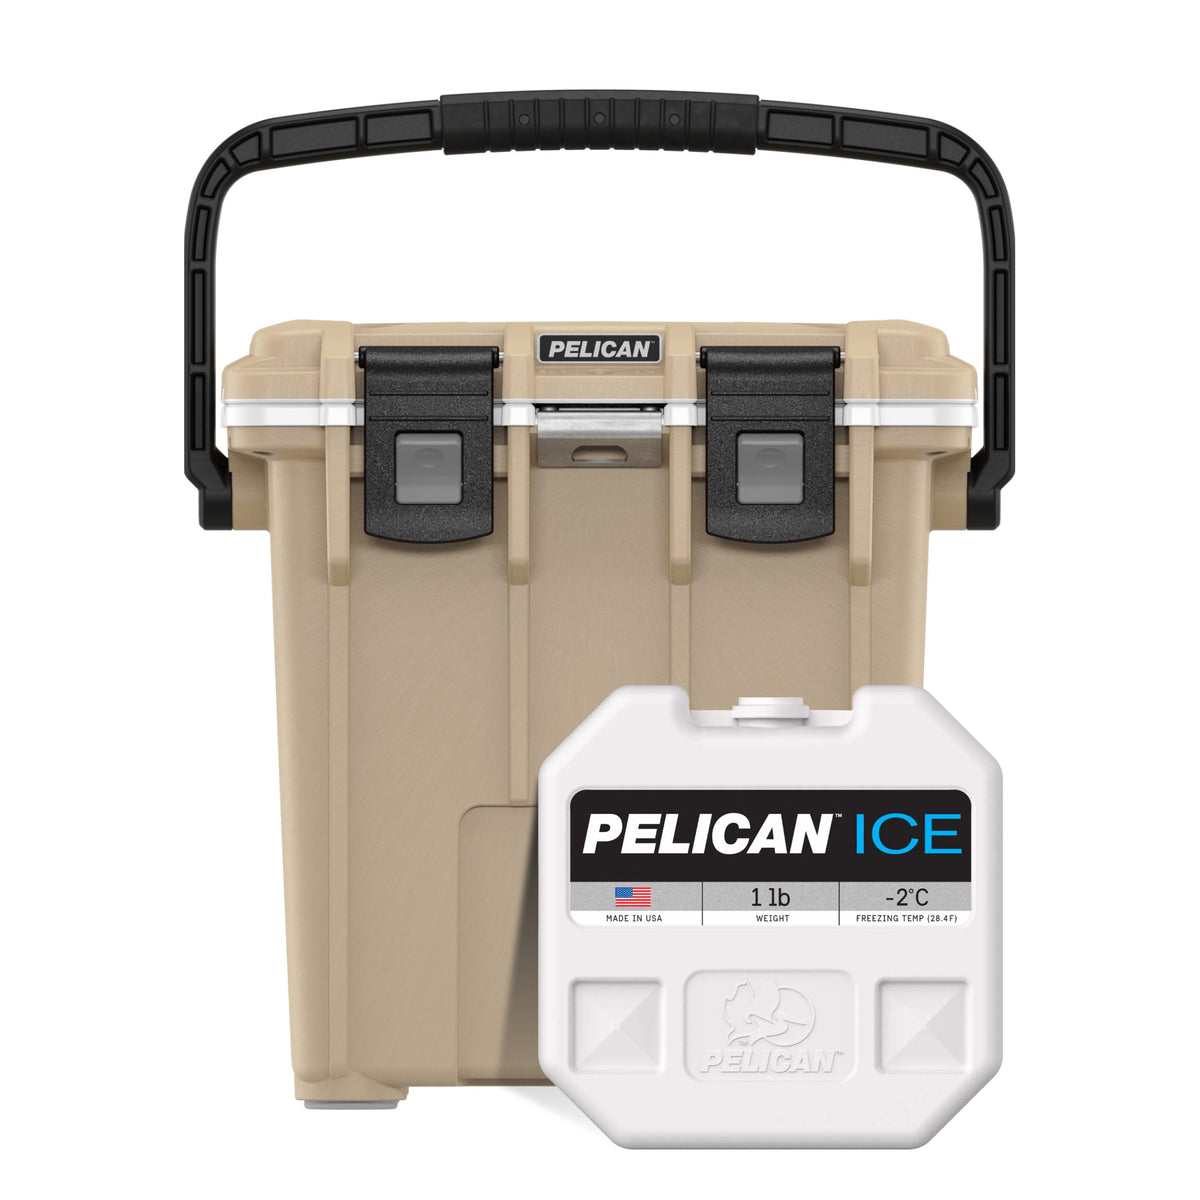 Tan / White Pelican 20QT Cooler with 1lb Ice Pack